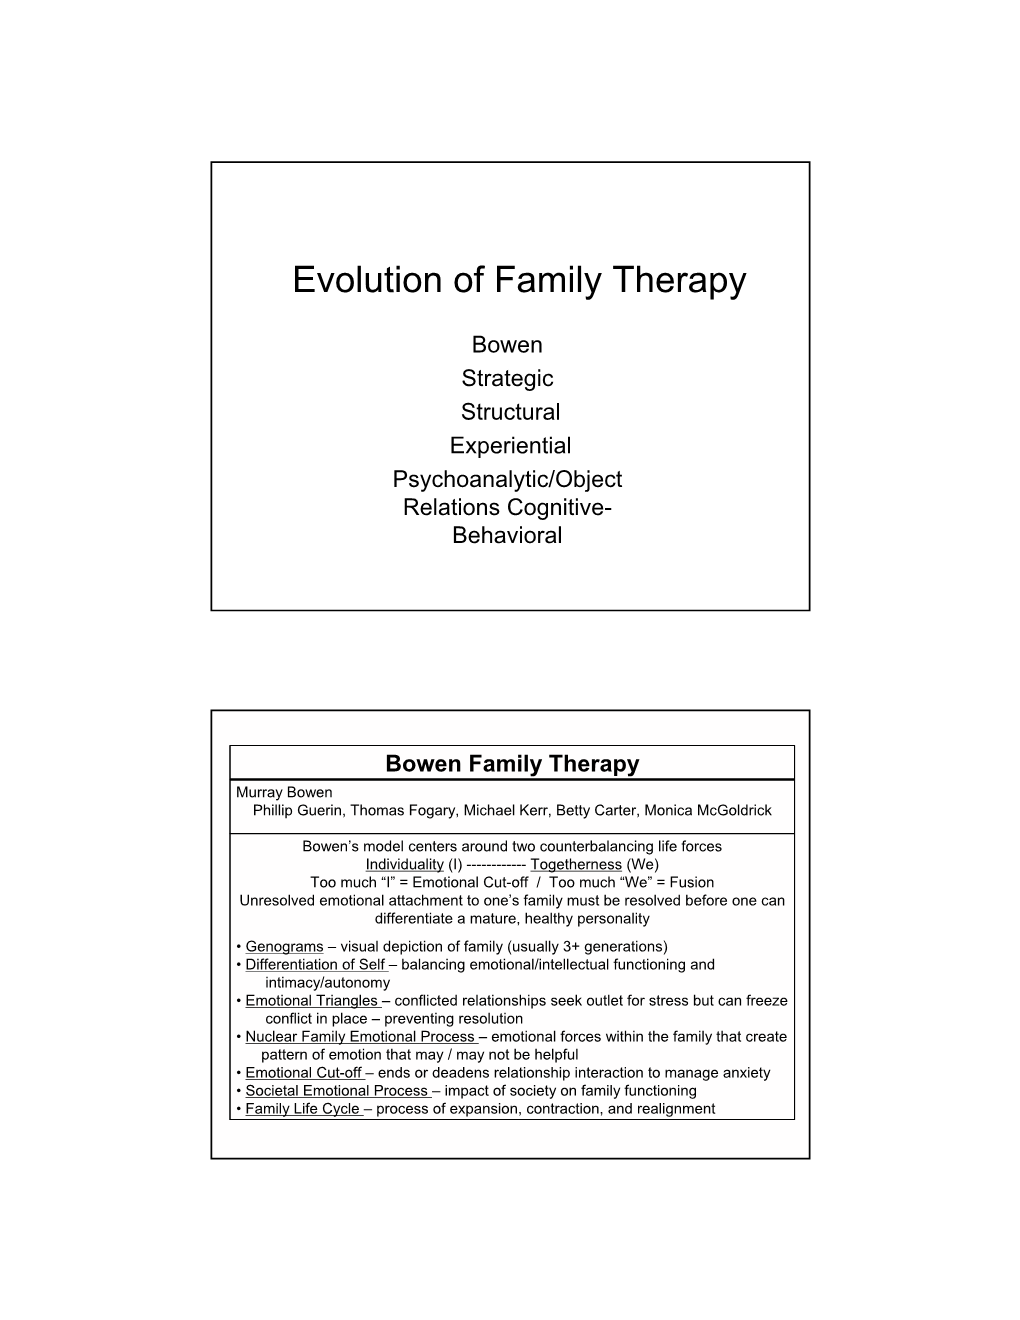 Evolution of Family Therapy